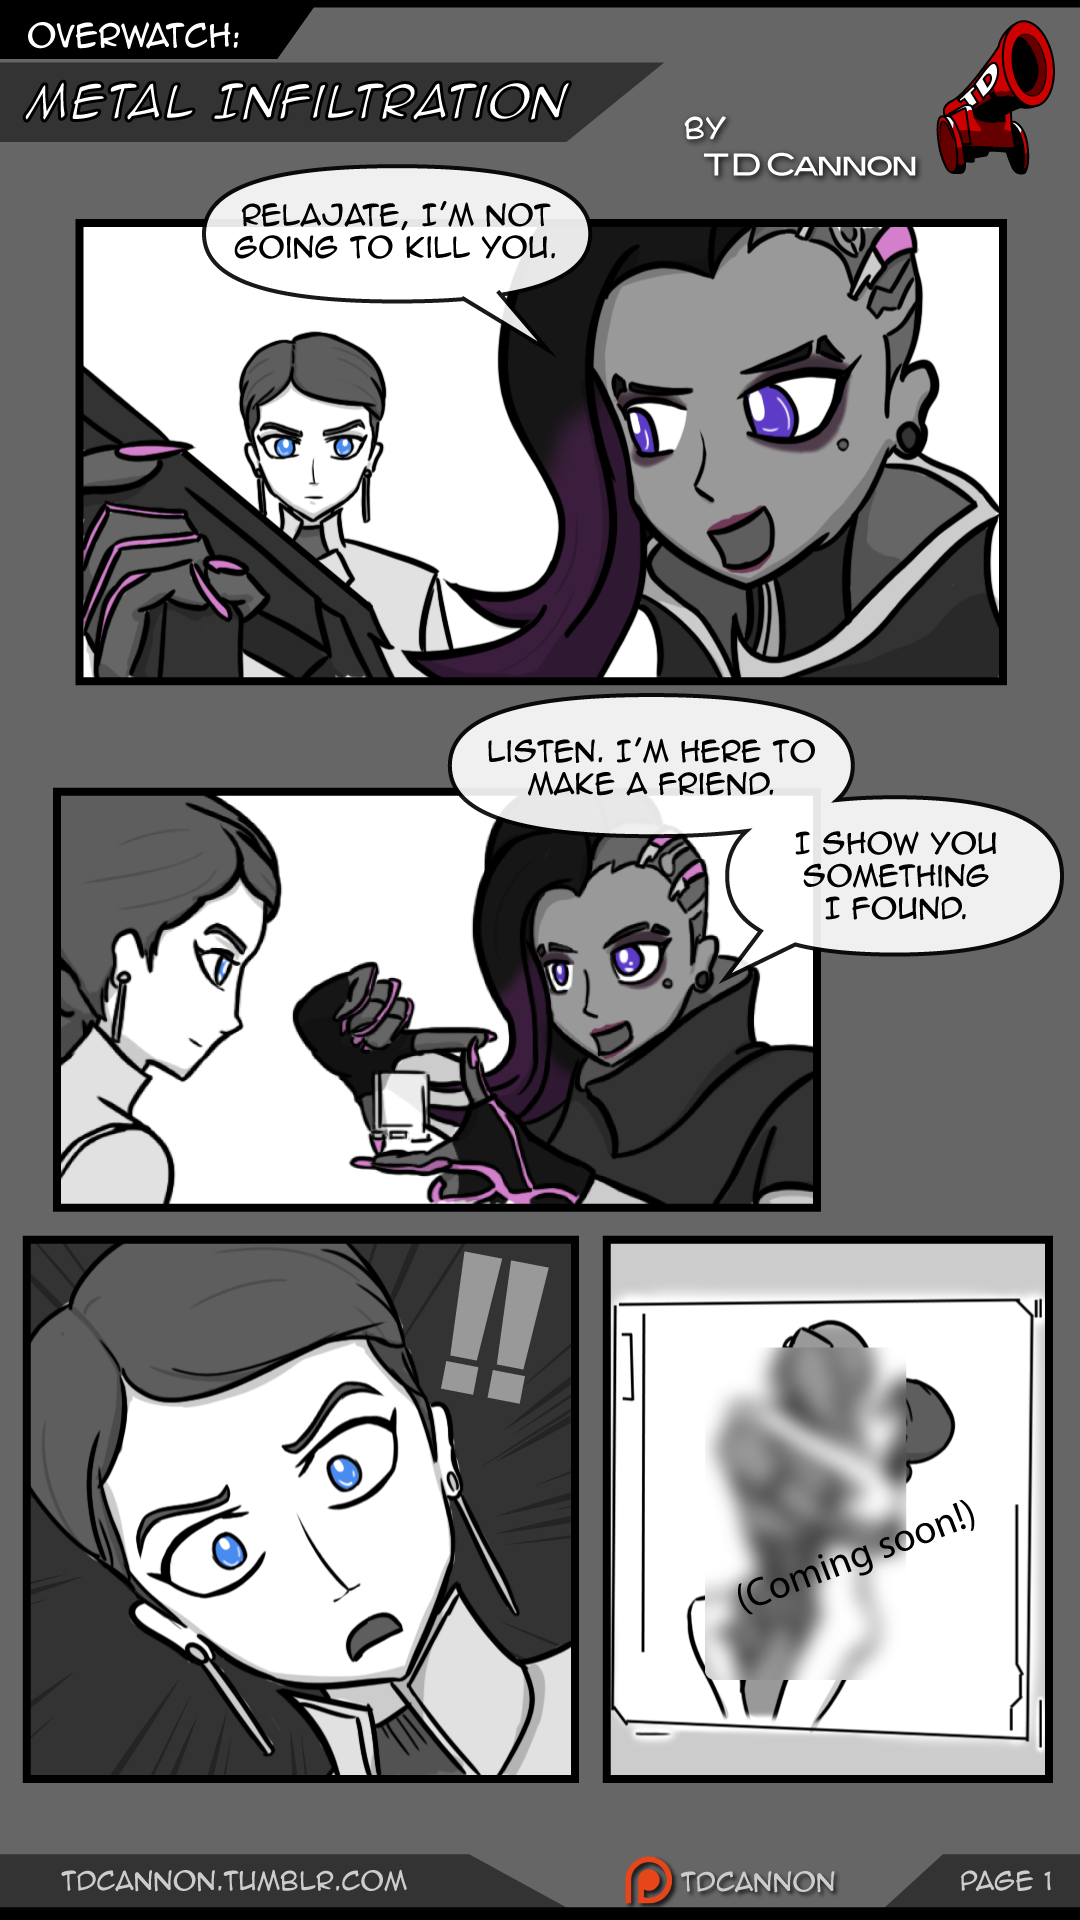 PREVIEW of a multi-page comic coming up, with SOMBRA taking front and center!  Based